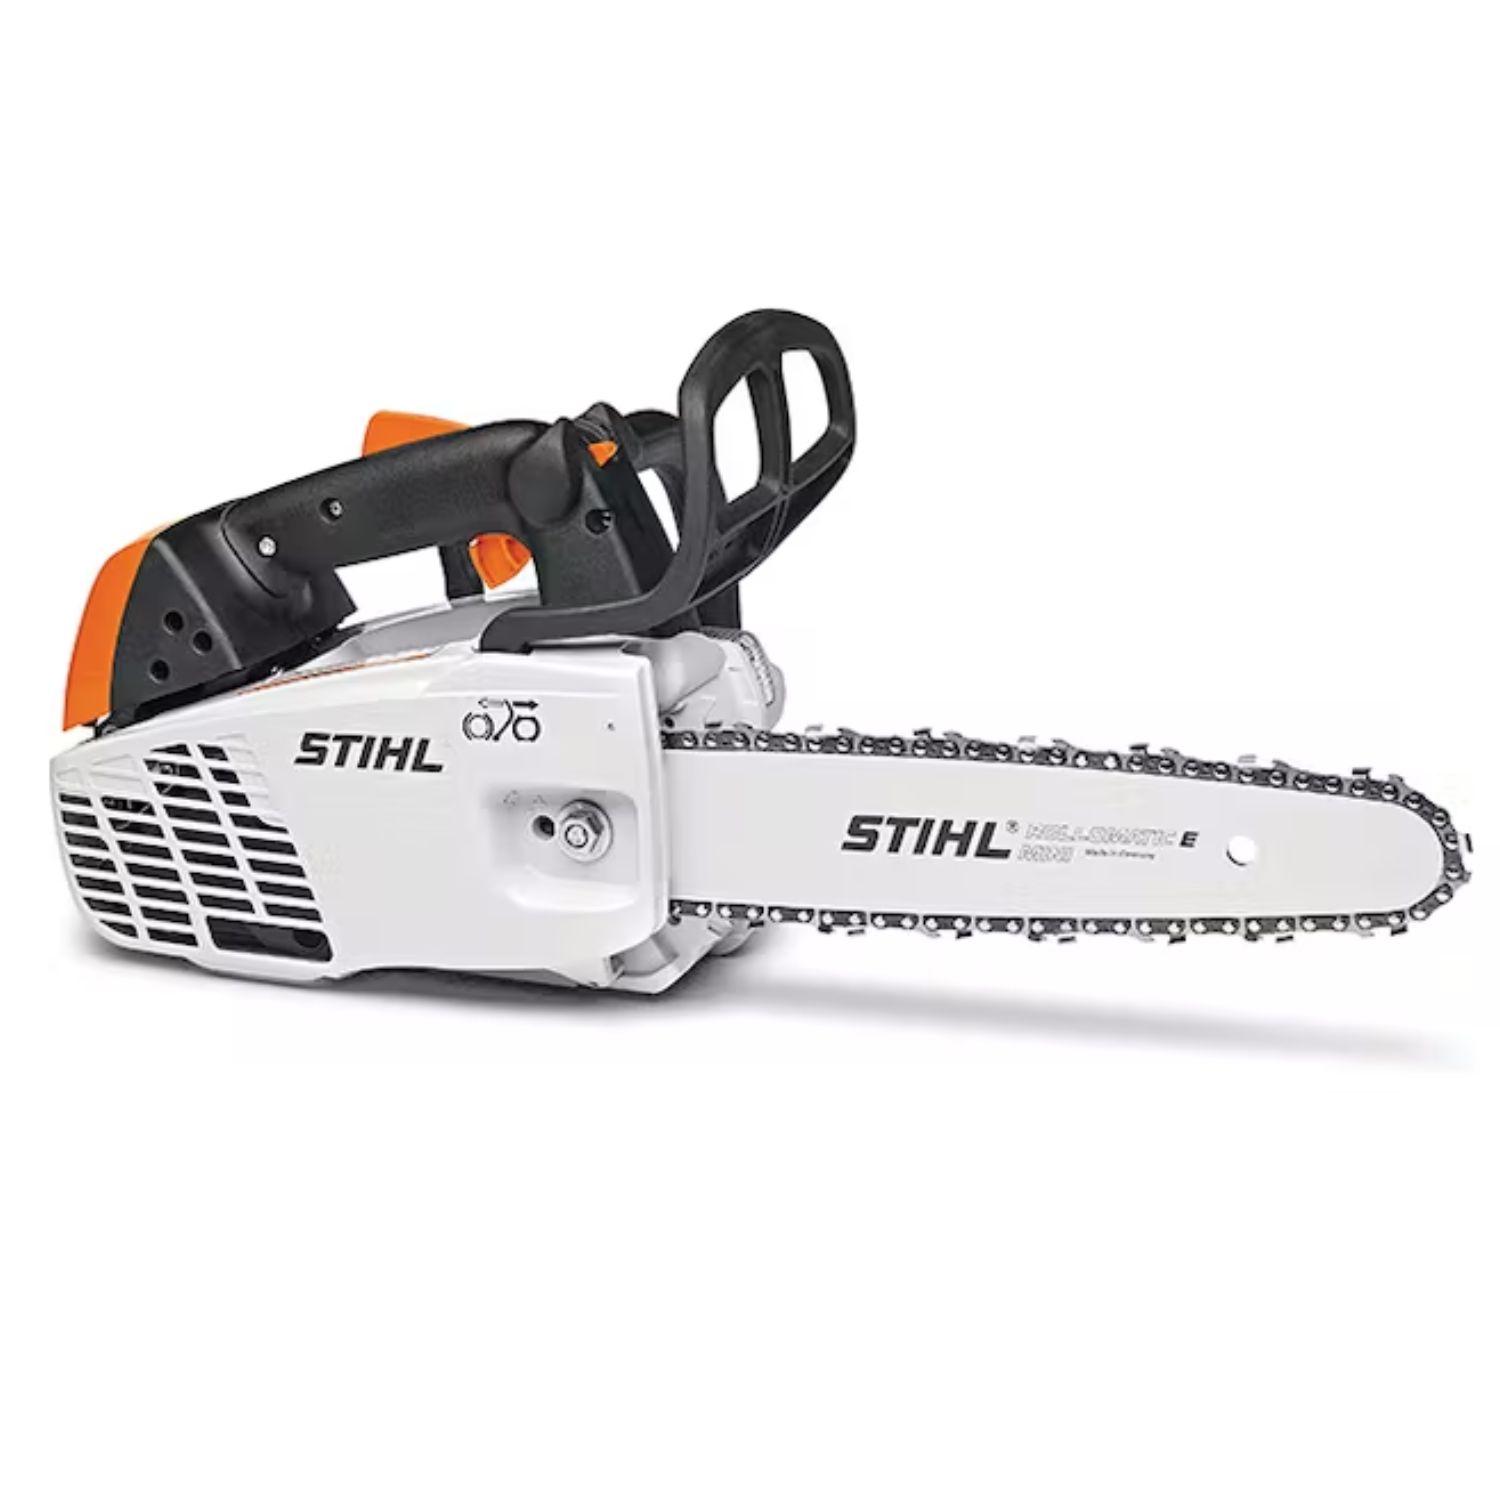 Stihl MS 500i Chainsaw with Electronically Fuel Injection